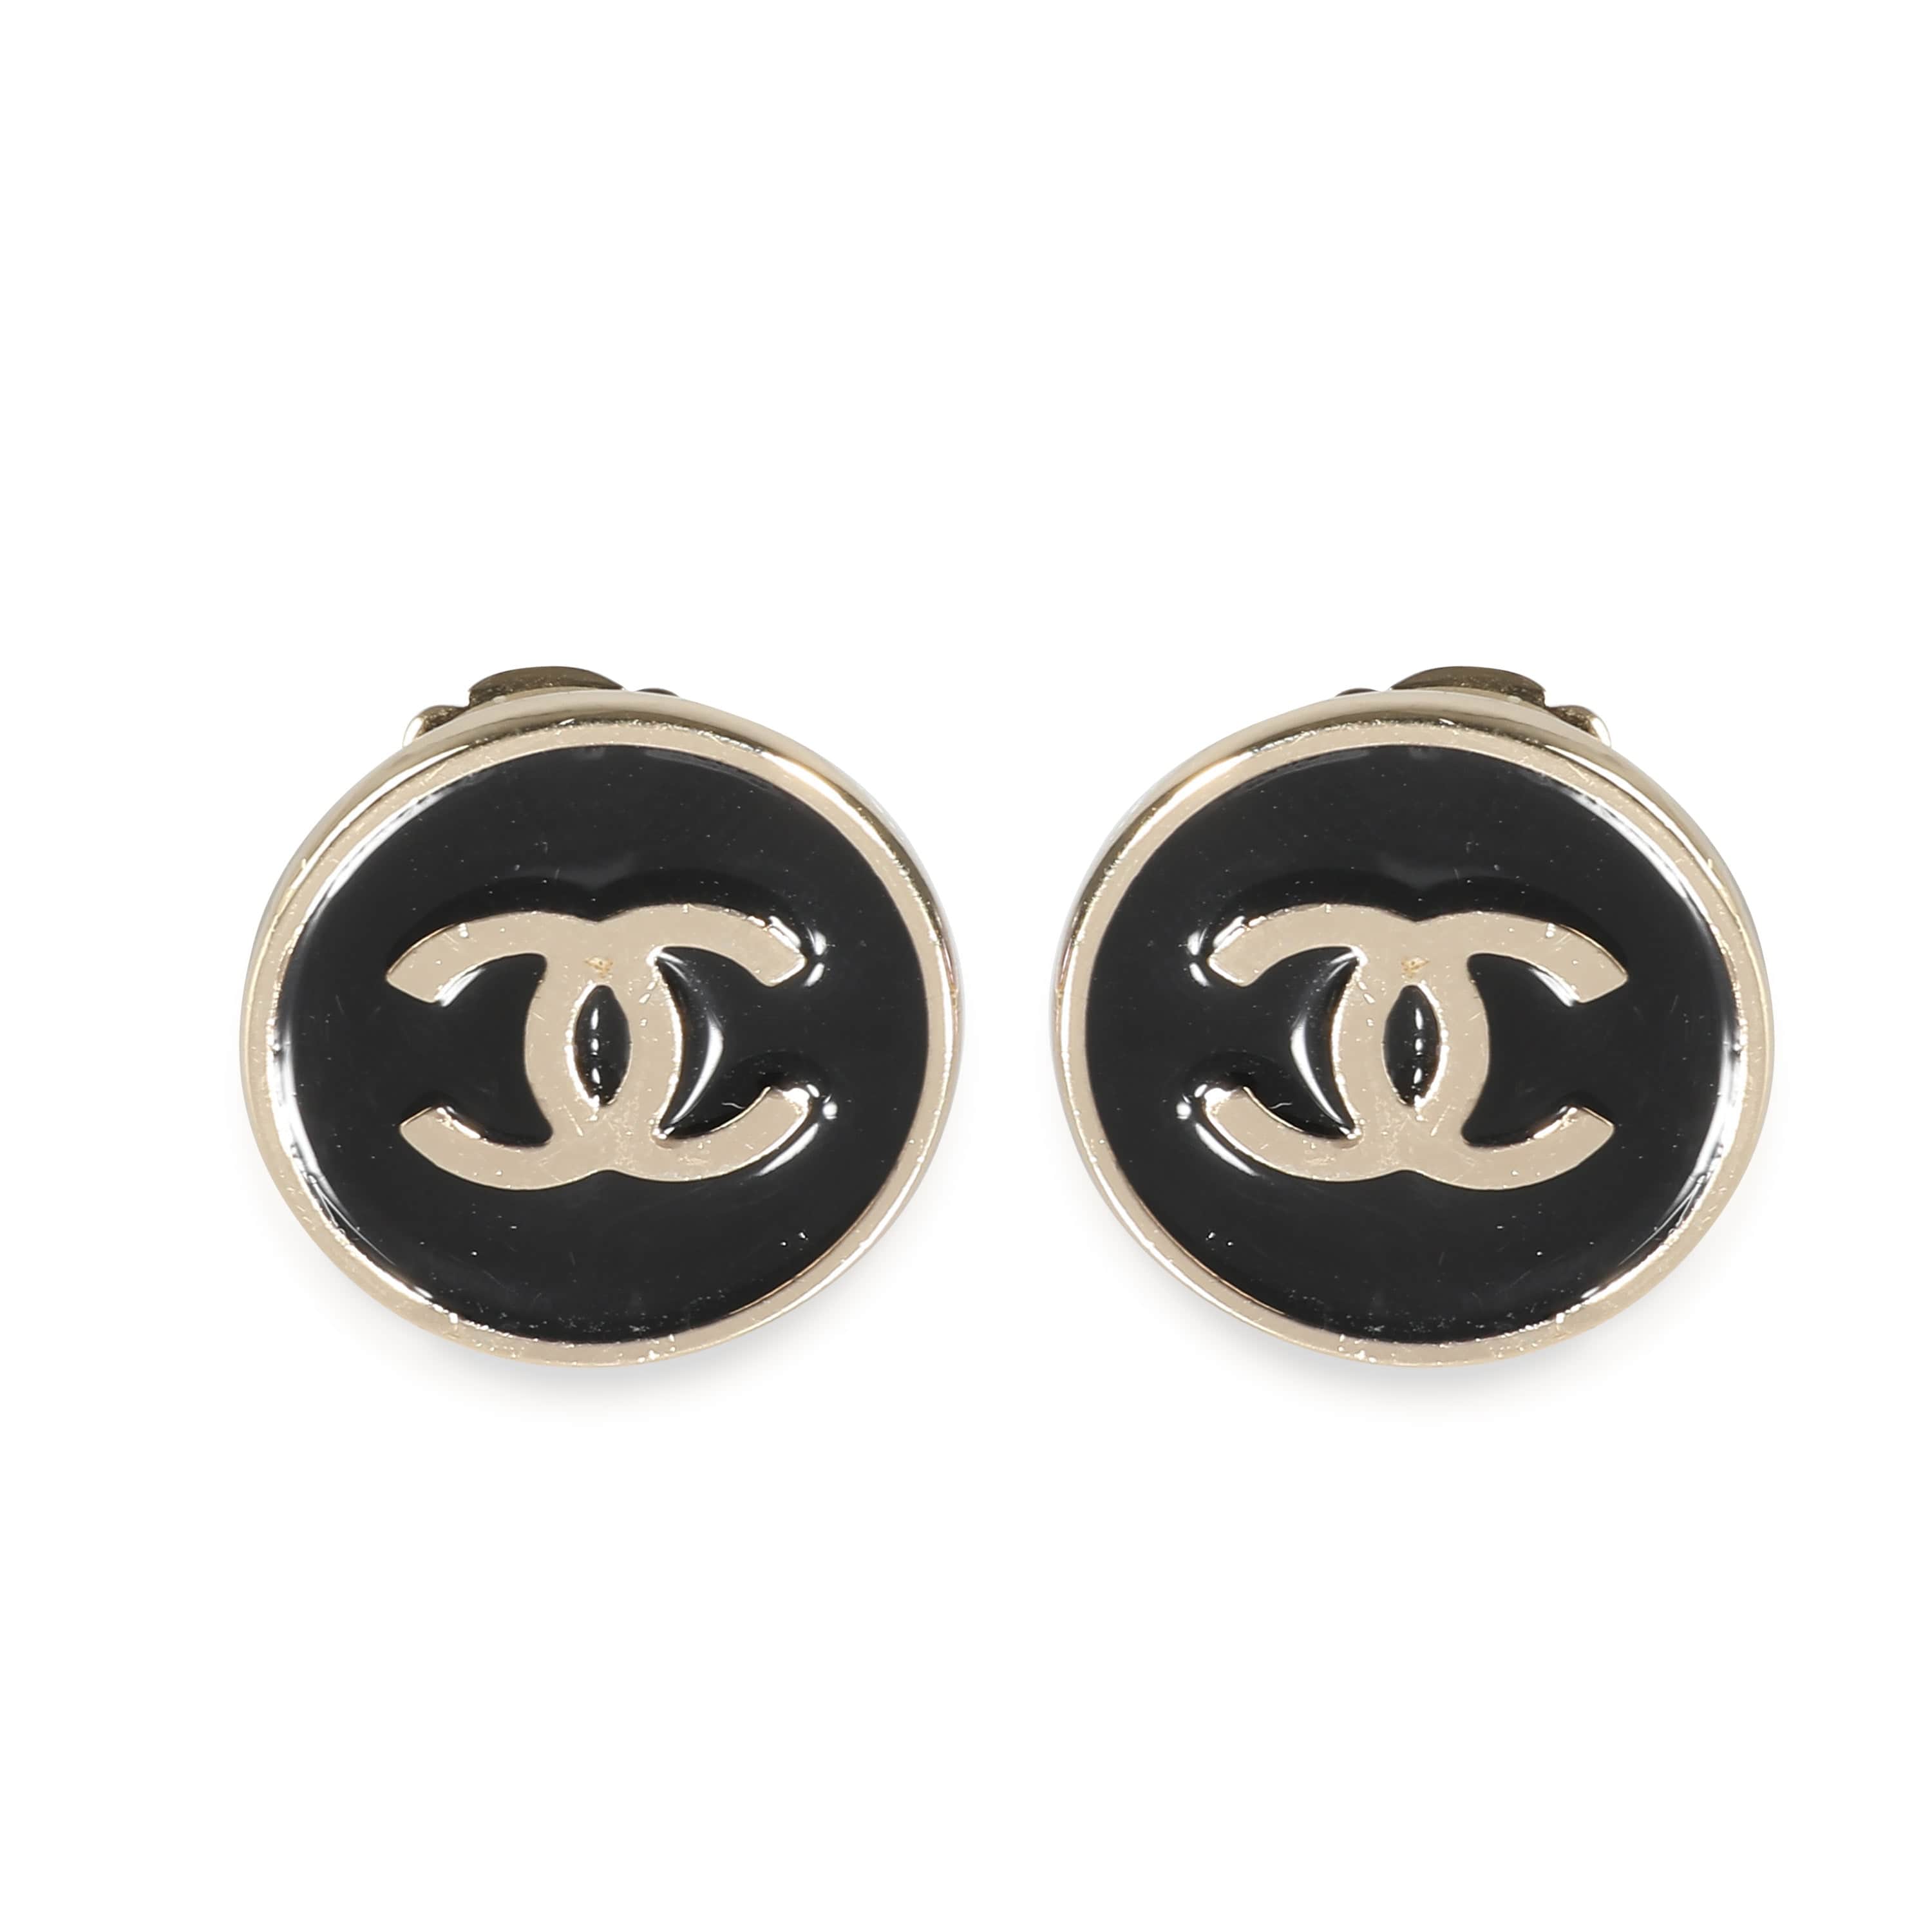 Chanel Chanel  CC Gold Tone with Black Enamel Button Earrings